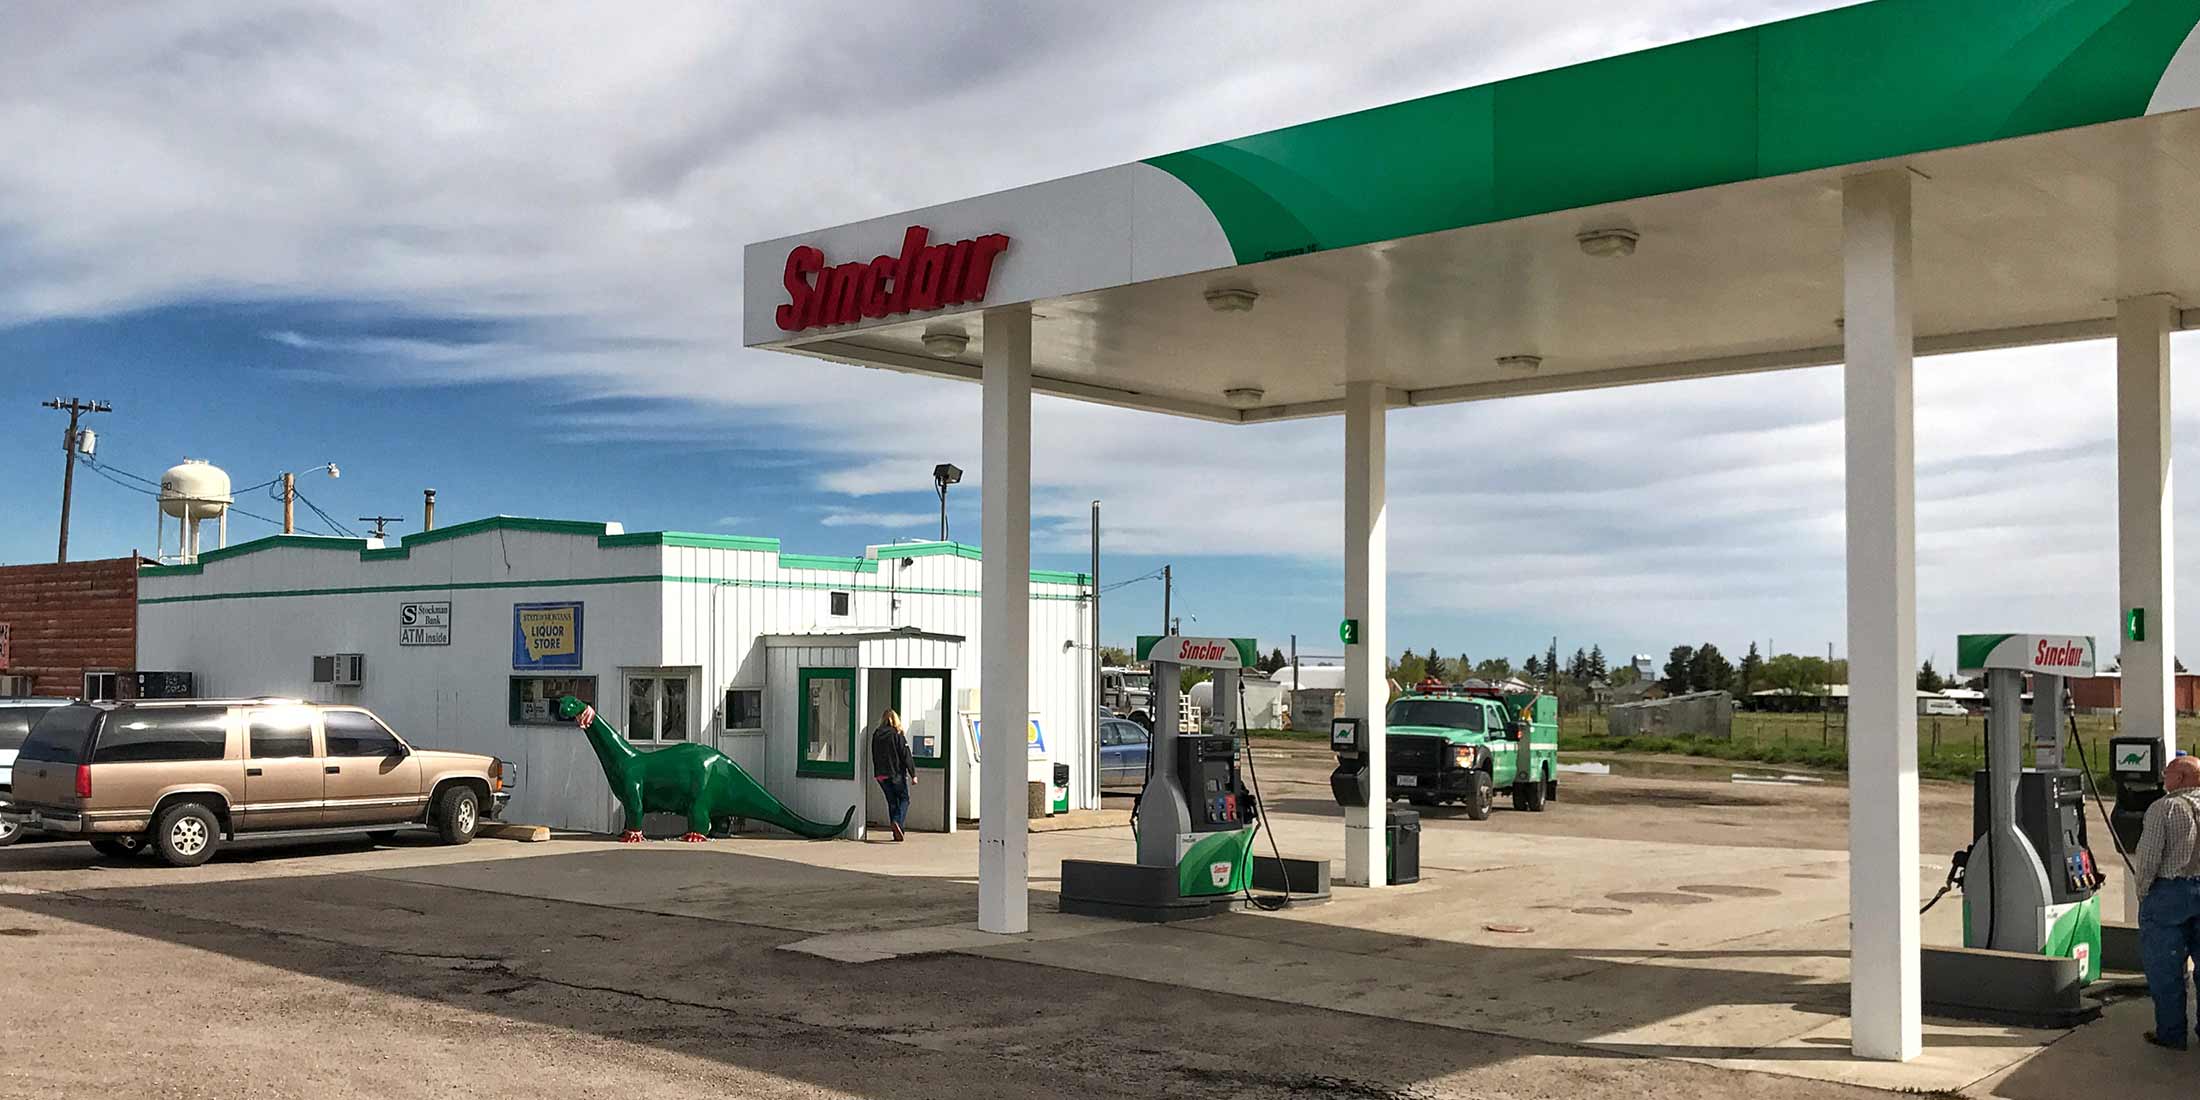 Information about the Sinclair By-Way Service and Gas Station. Located on the outskirt of Stanford, Montana on Highway 80 - Judith Basin County. There is a Montana State Liquor Store here as well.